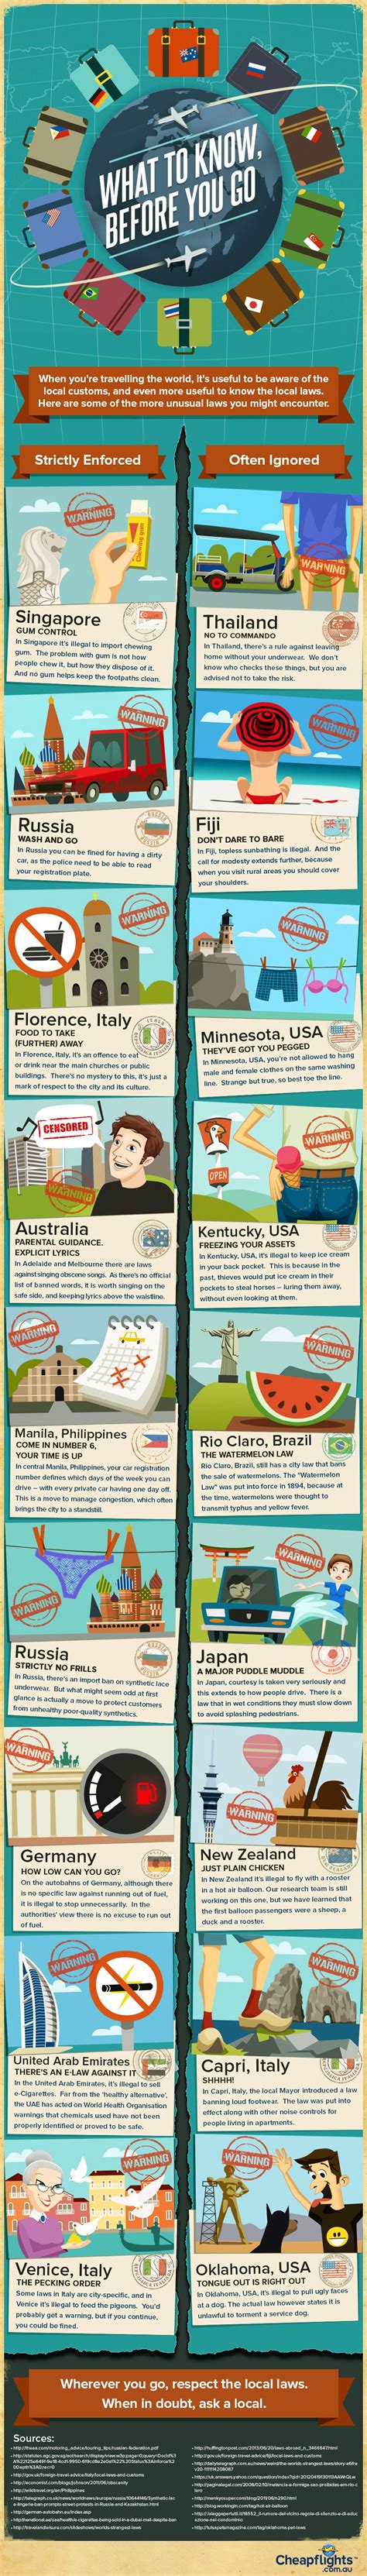 Strange Laws Around The World Infographic Daily Infographic Travel